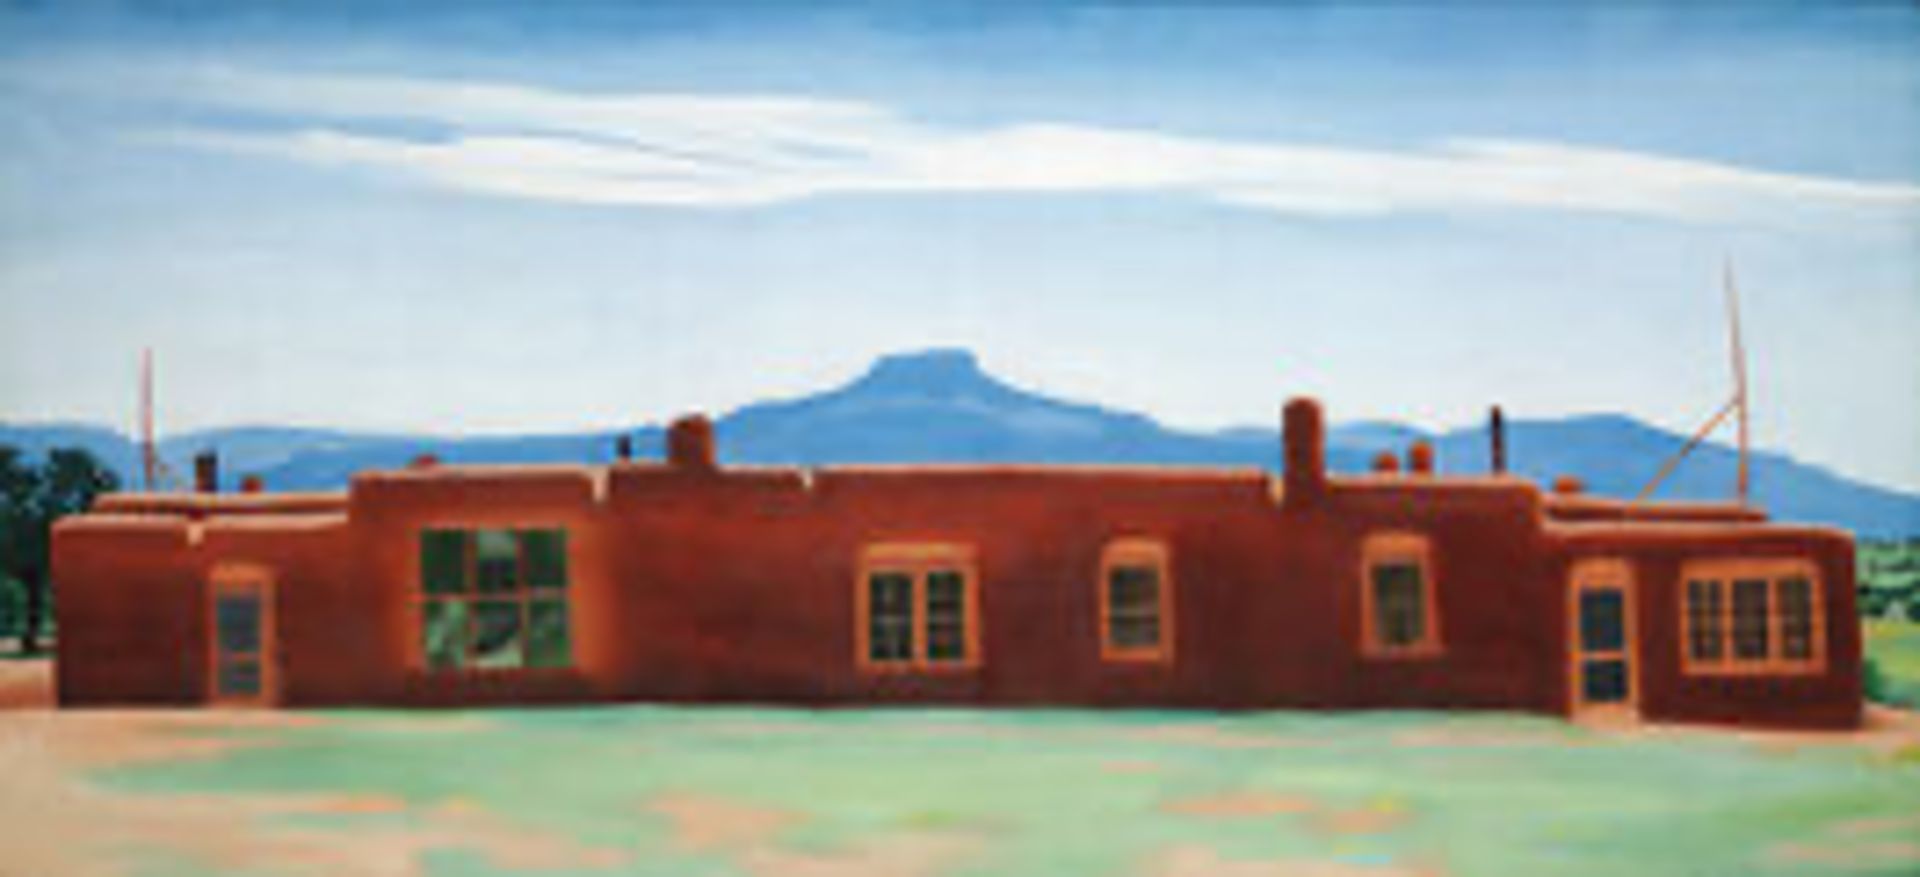 Georgia Okeeffe "The House I Live In" Offset LIthograph - Bild 2 aus 2